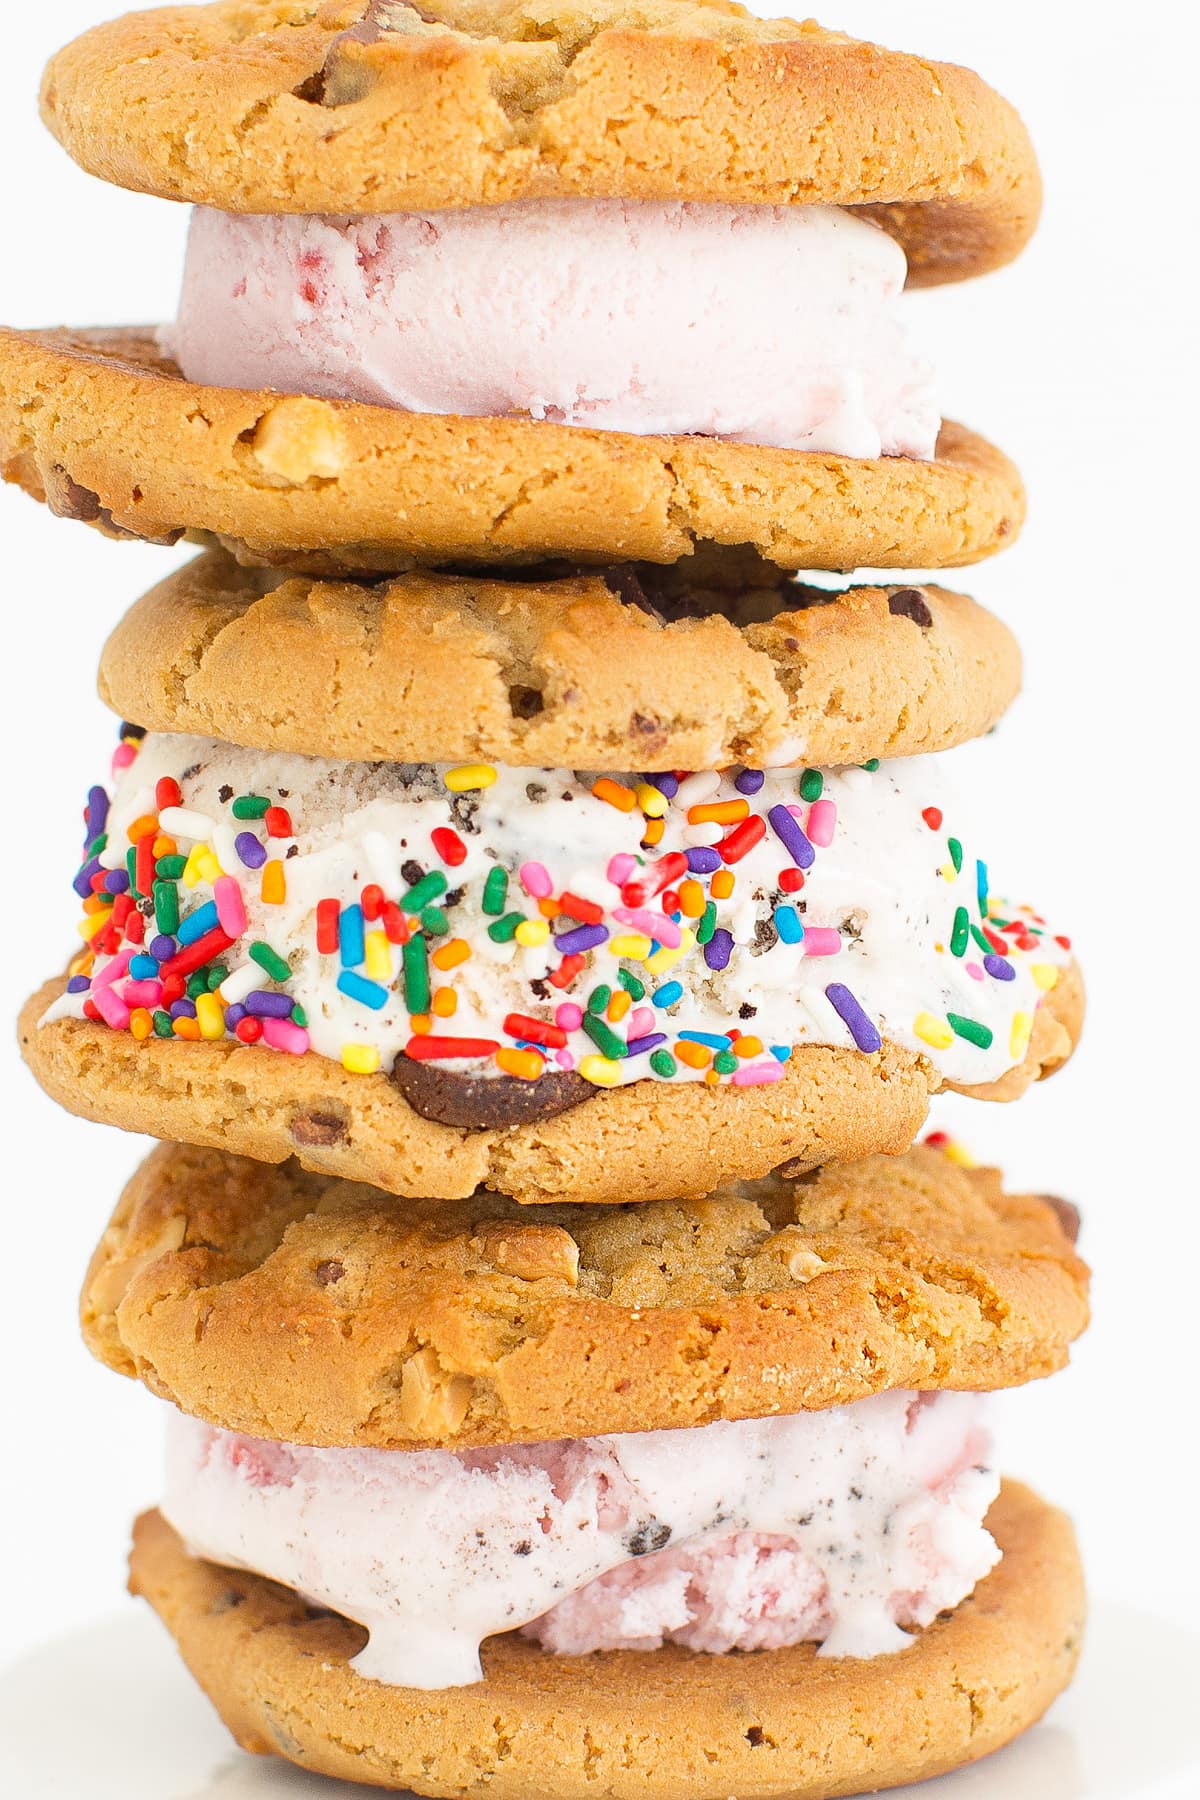 We All Scream For Warm Cookie Ice Cream Sandwiches, - Ice Cream Wallpaper For Iphone - HD Wallpaper 